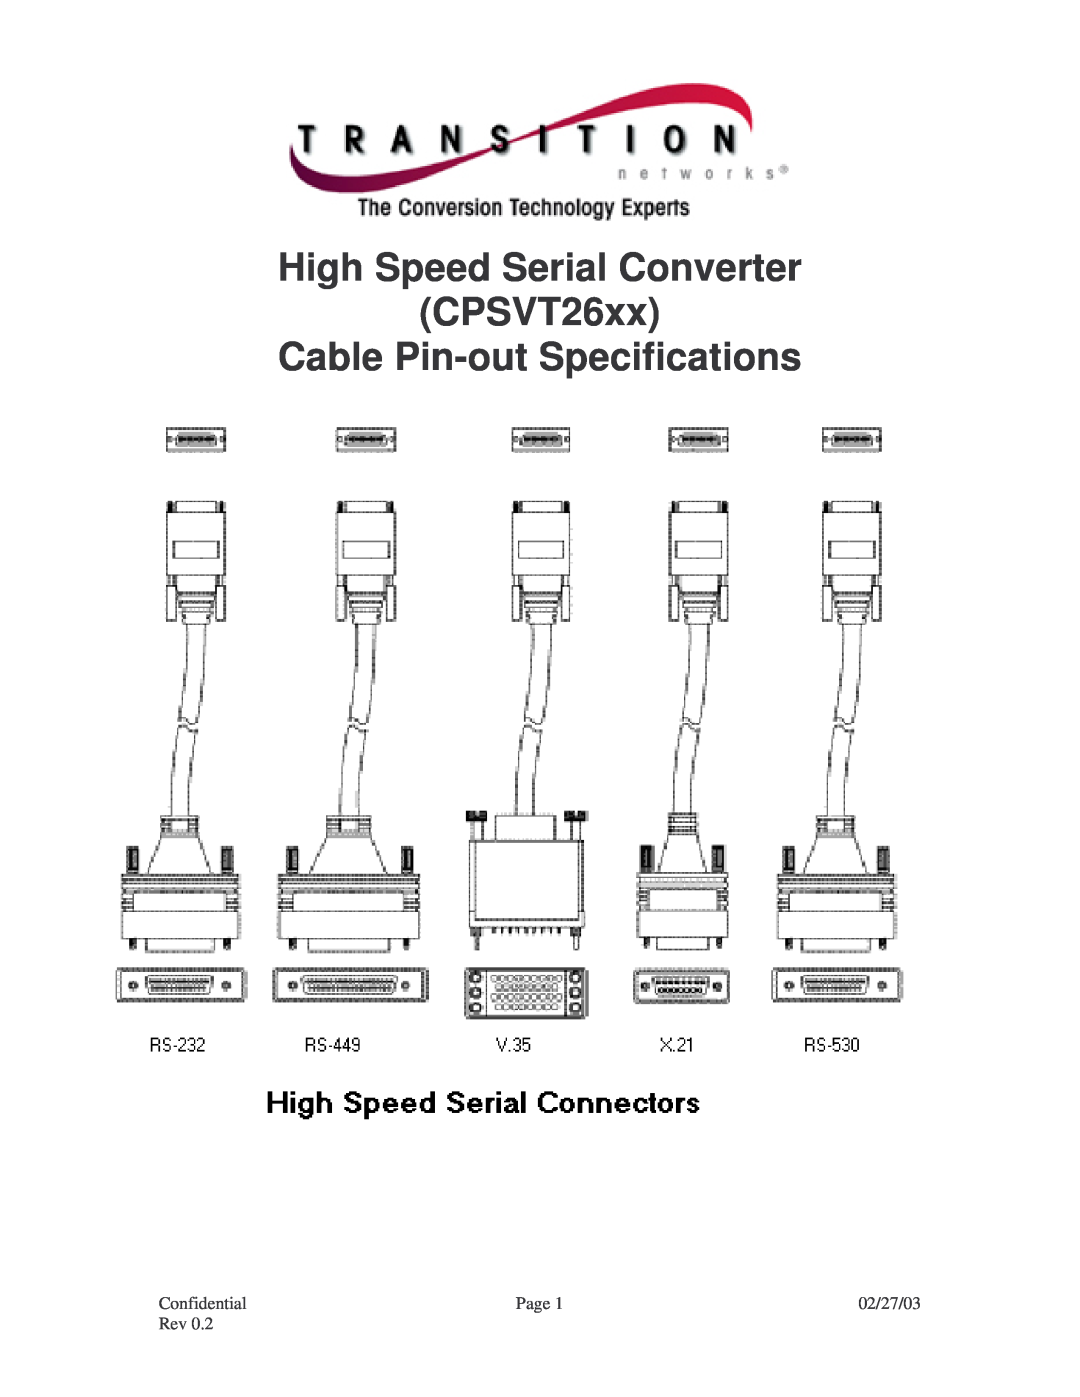 Transition Networks RS-449 specifications High Speed Serial Converter CPSVT26xx Cable Pin-out Specifications, Confidential 